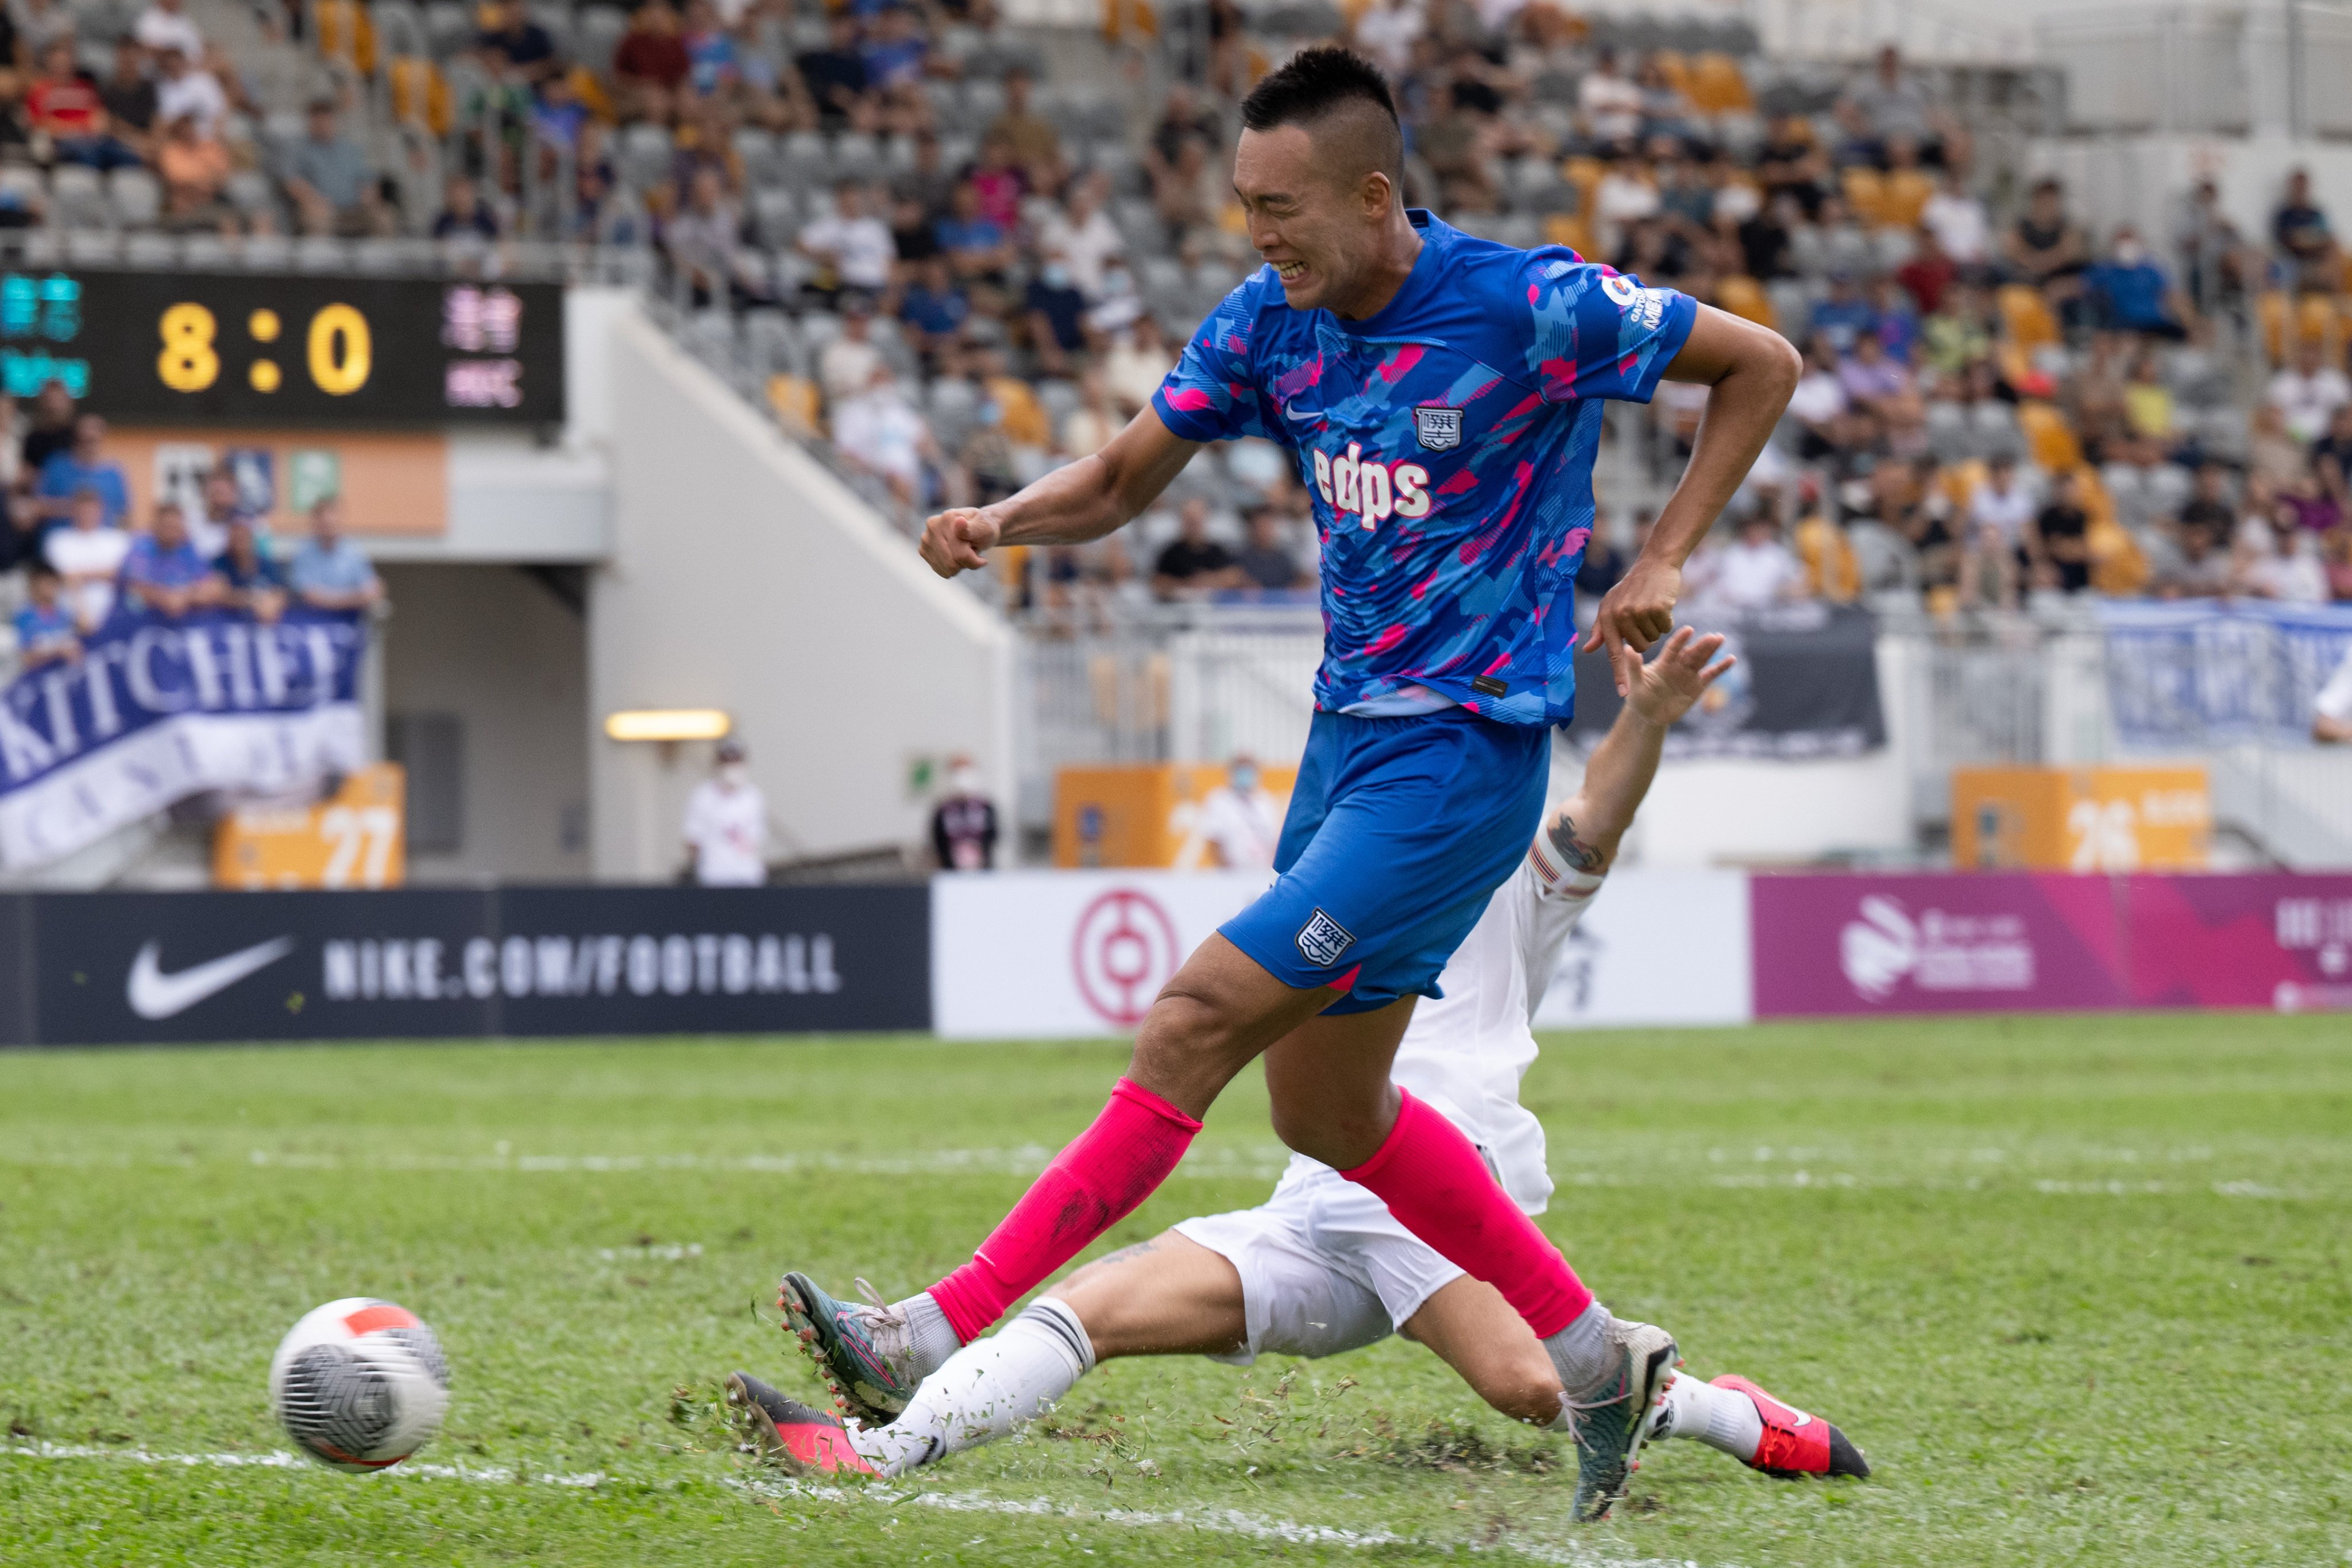 Kitchee striker Kim Shin-wook scored his first goals for the club since arriving last season. Photo: HKFA
